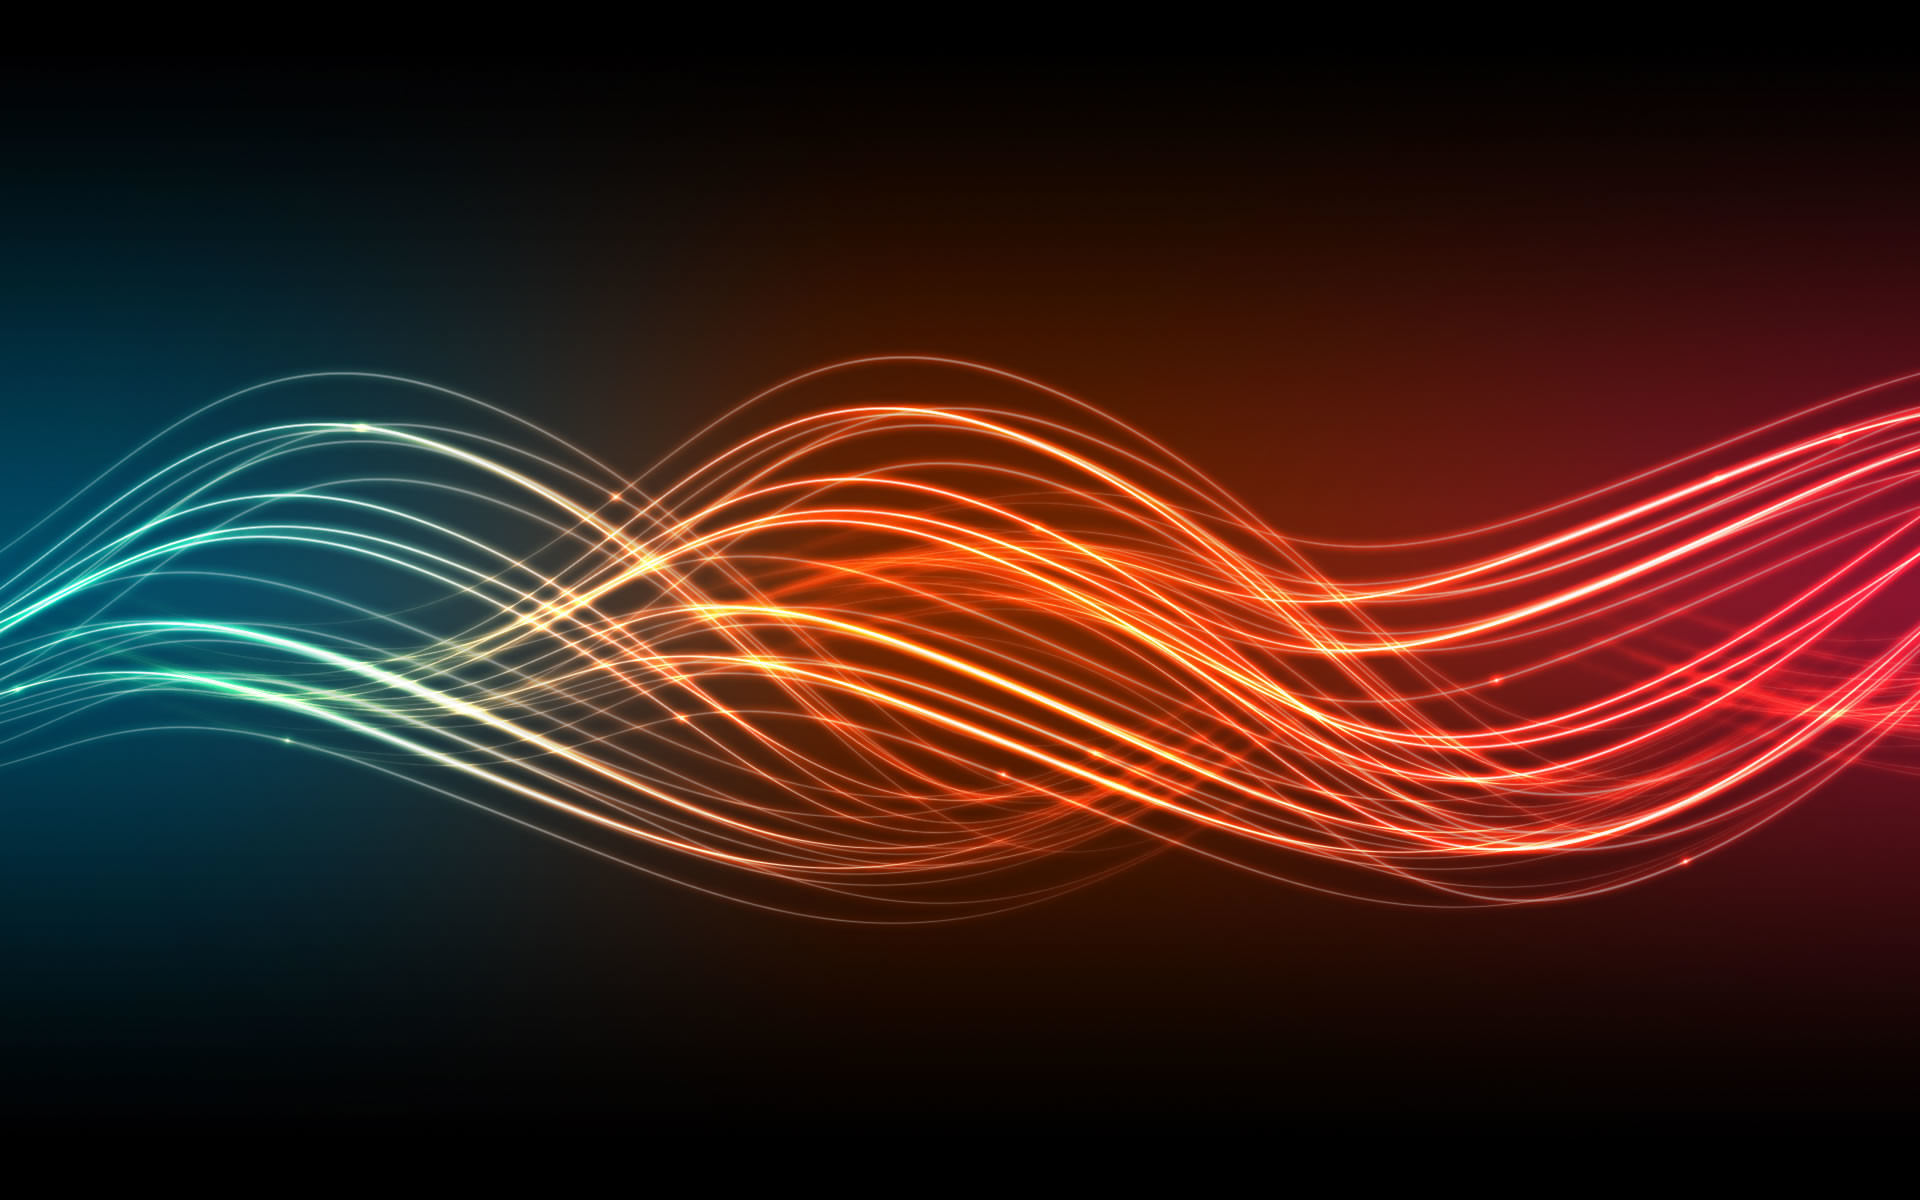 1920x1200 Waves Widescreen Wallpapers HD Wallpapers Abstract Wallpapers Wave Blue  Orange Red HD Wallpaper Widescreen High Quality